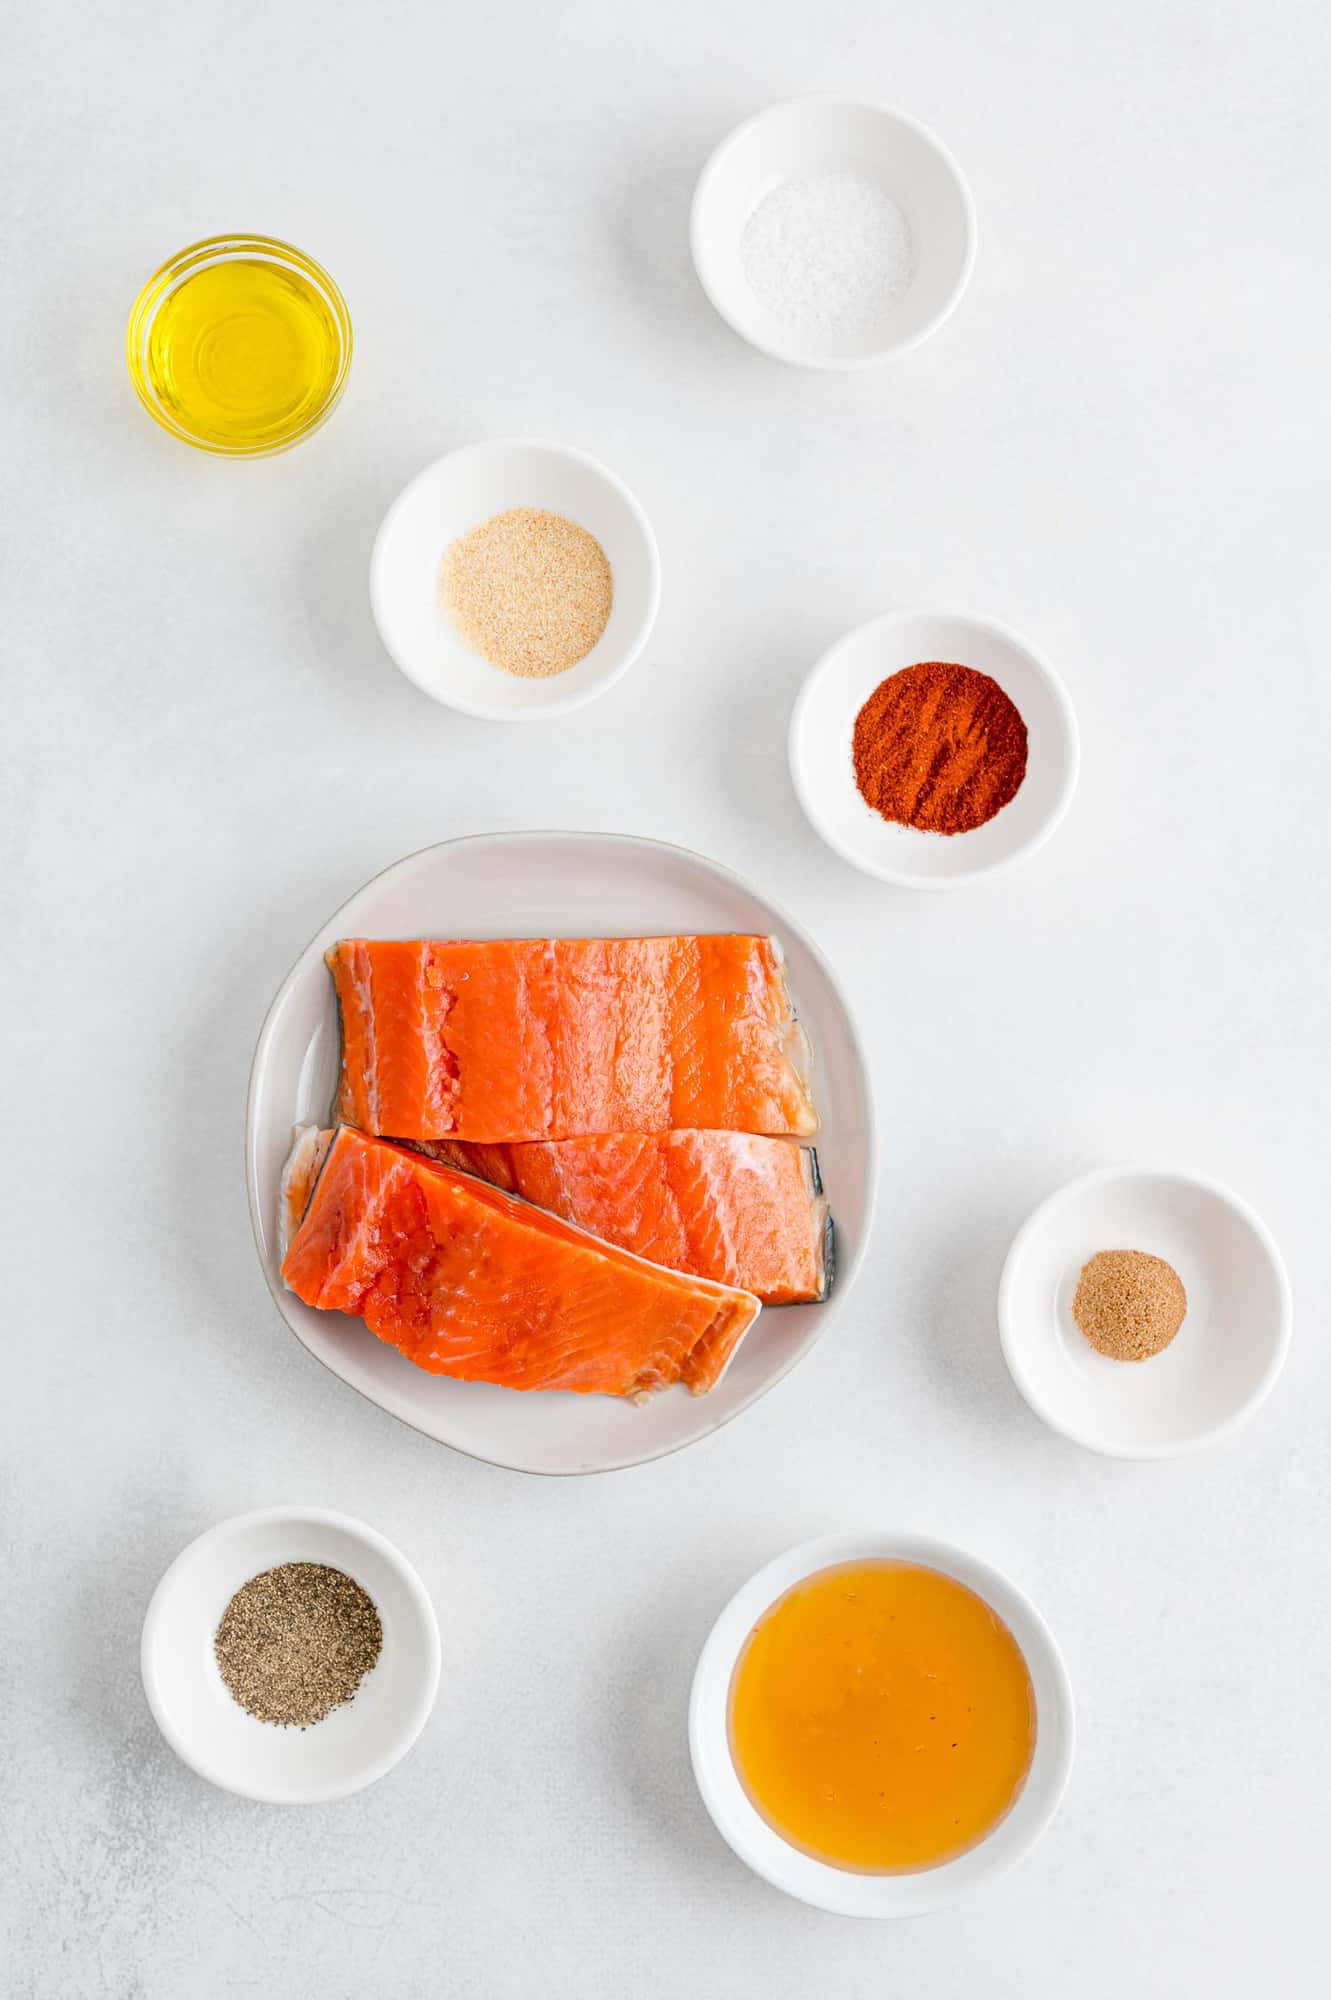 Ingredients for salmon bites in separate dishes, including salmon.